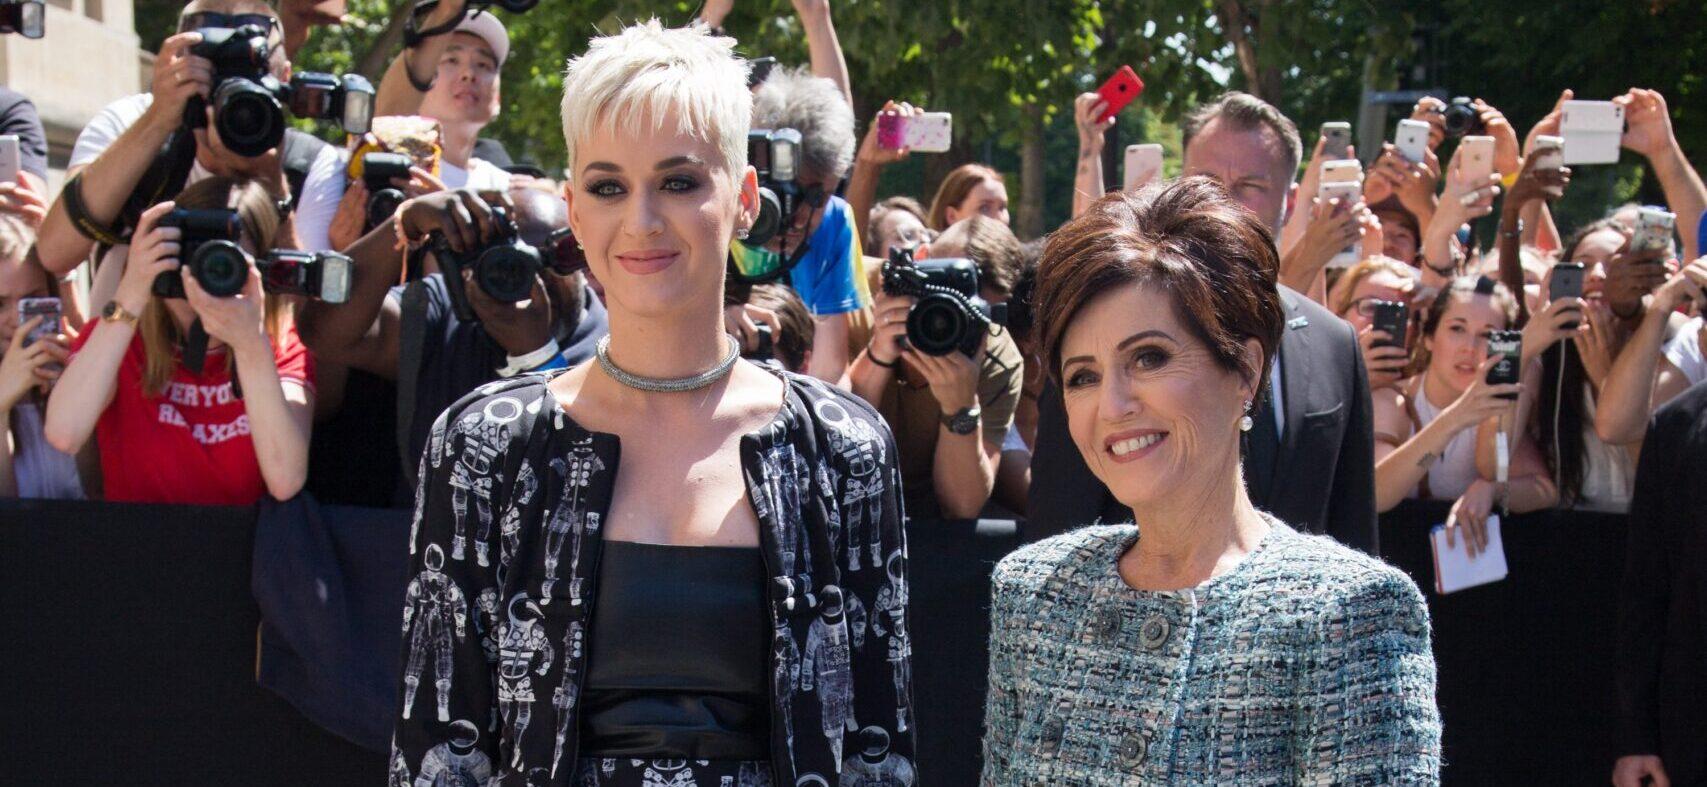 Katy Perry's Mom Volunteers To Feed Homeless Veterans, After Daughter's Legal Battle With Disabled Army Vet